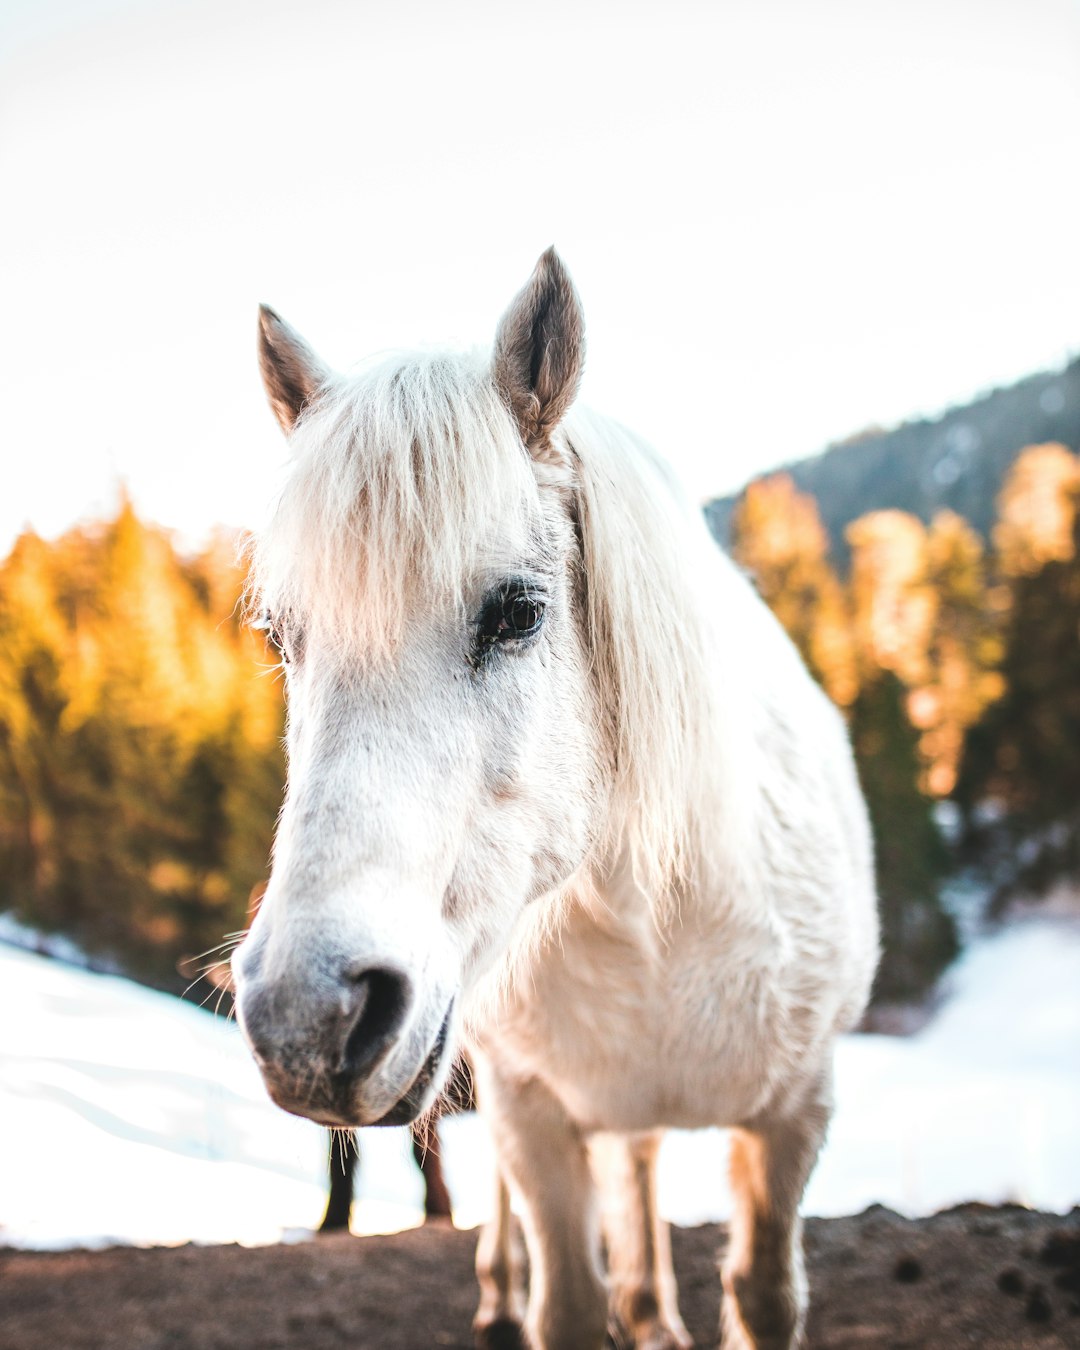 white horse on snow covered ground during daytime